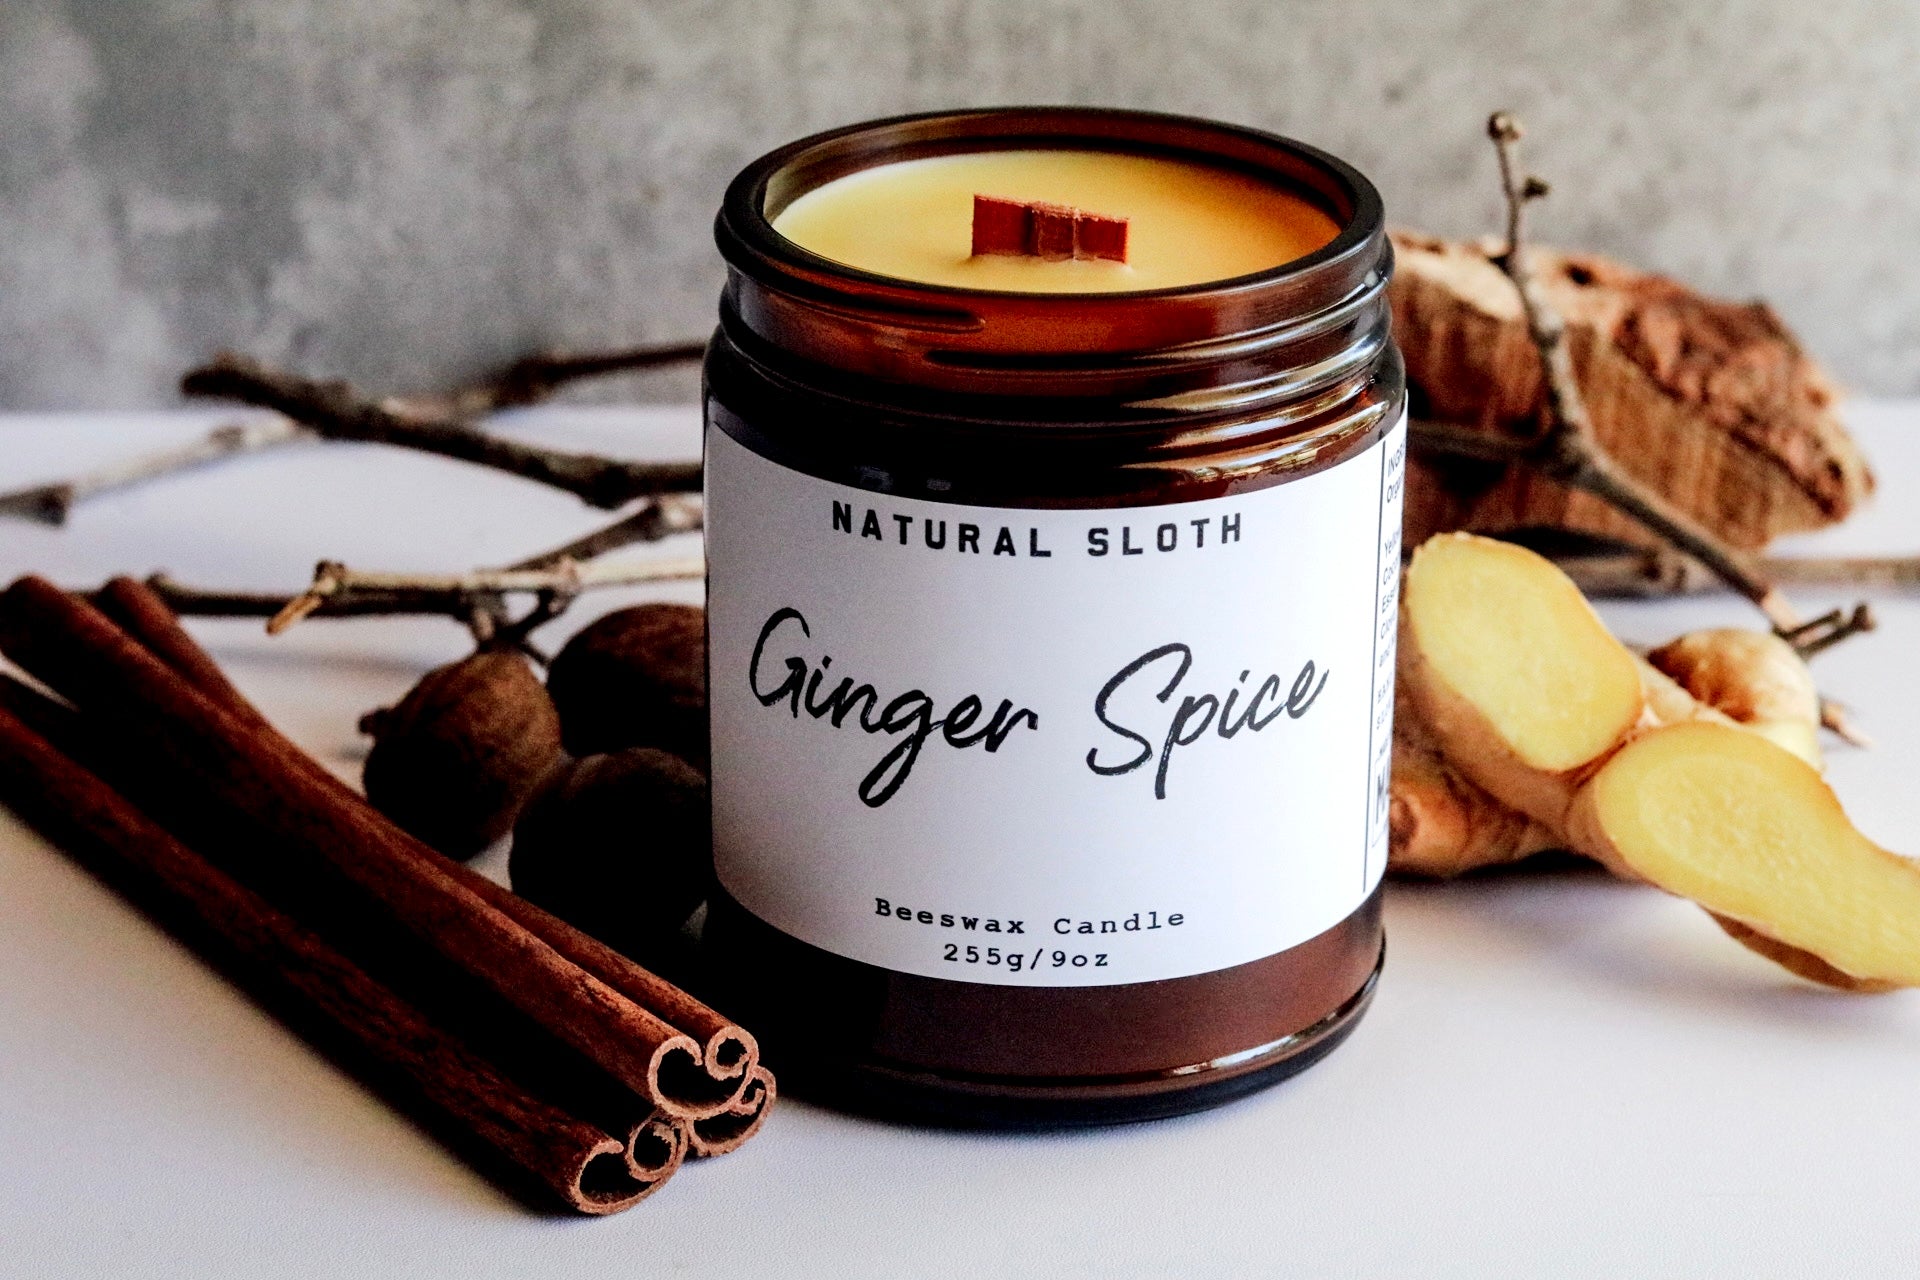 Ginger Spice Beeswax Candles